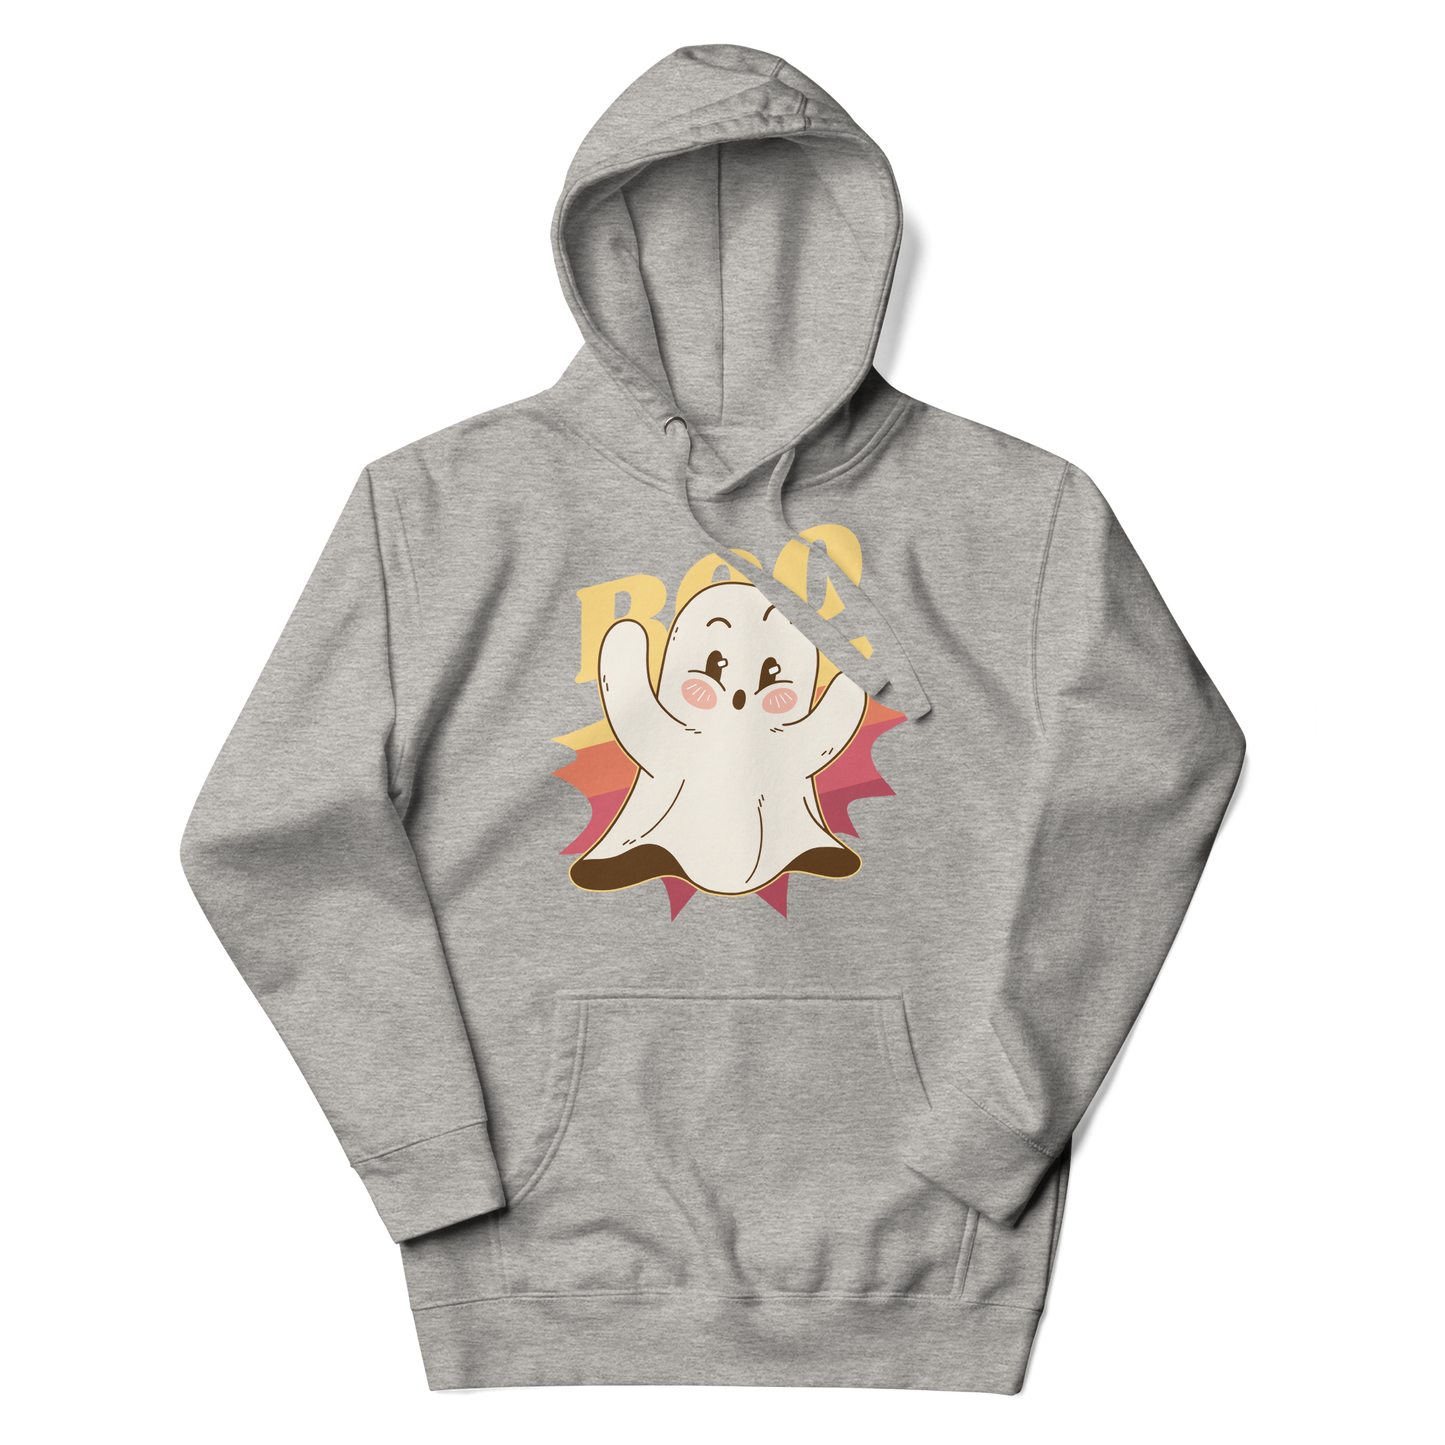 Cute ghost and the quote "Boo" | Unisex Hoodie